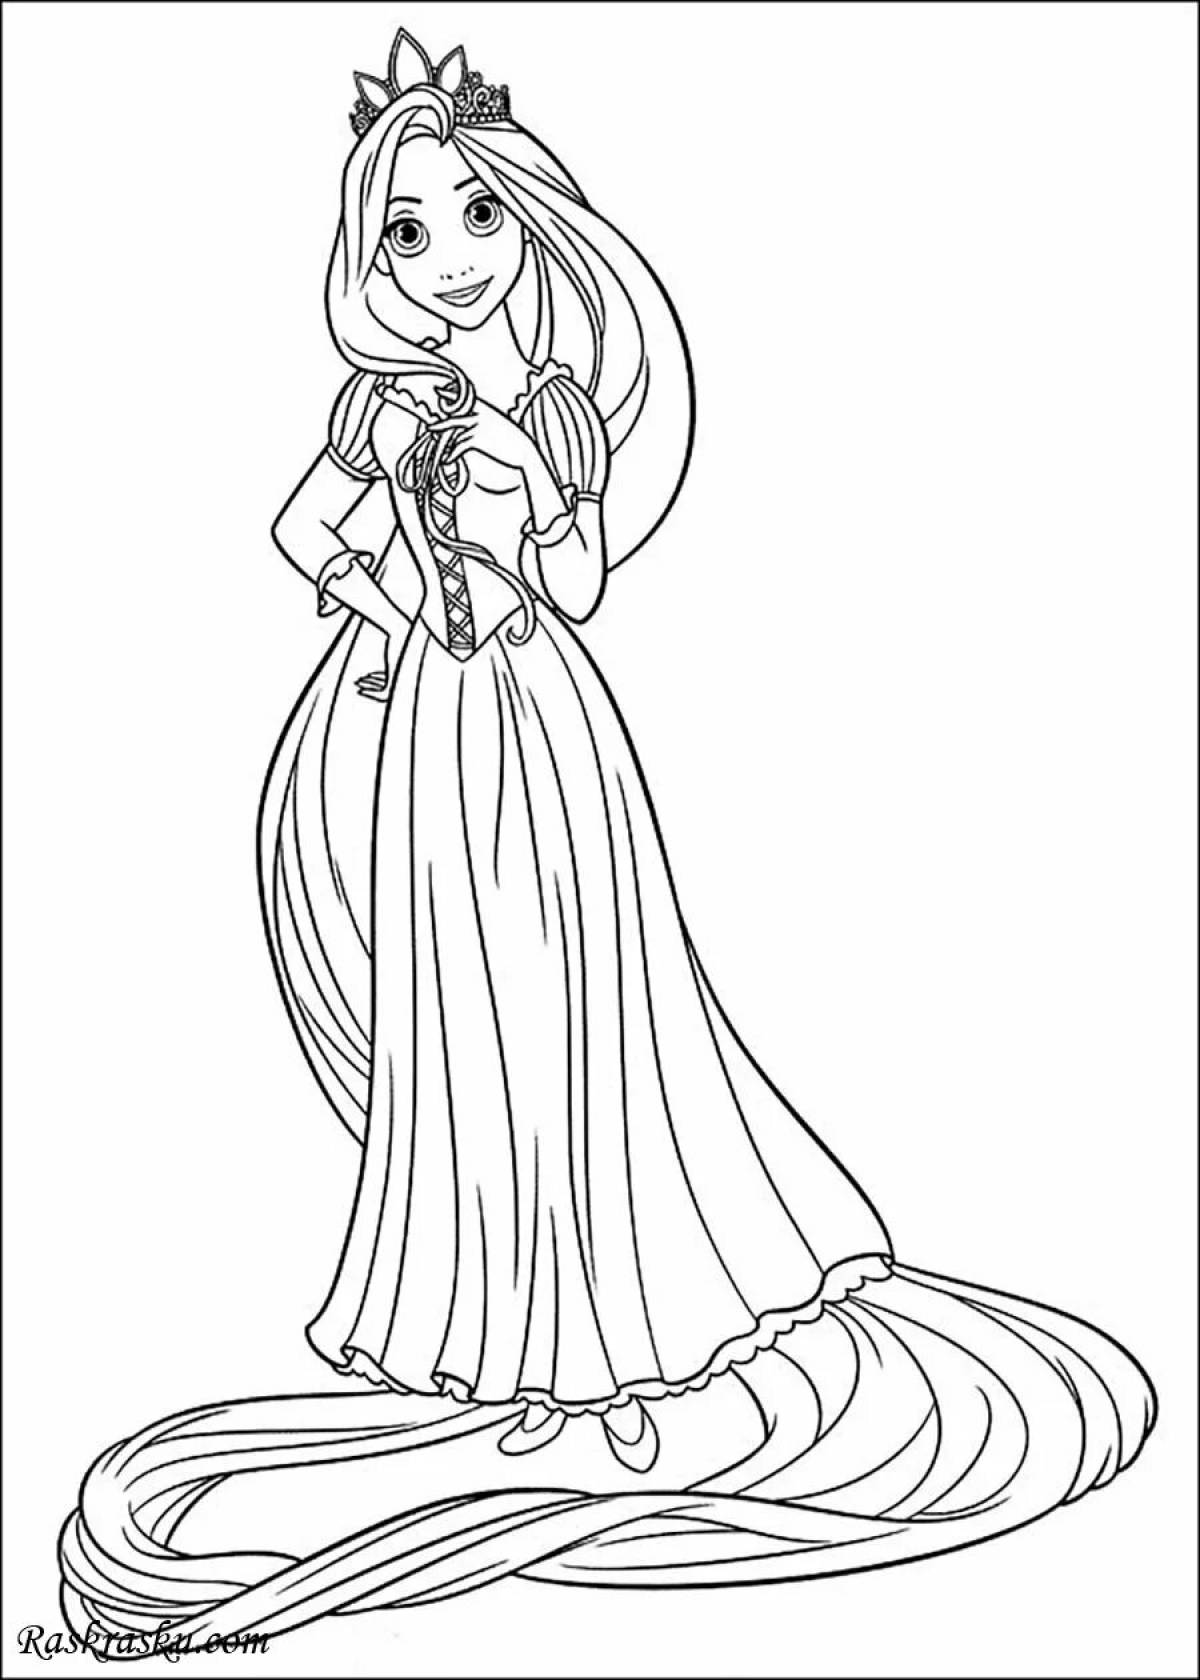 Grand coloring page include princesses